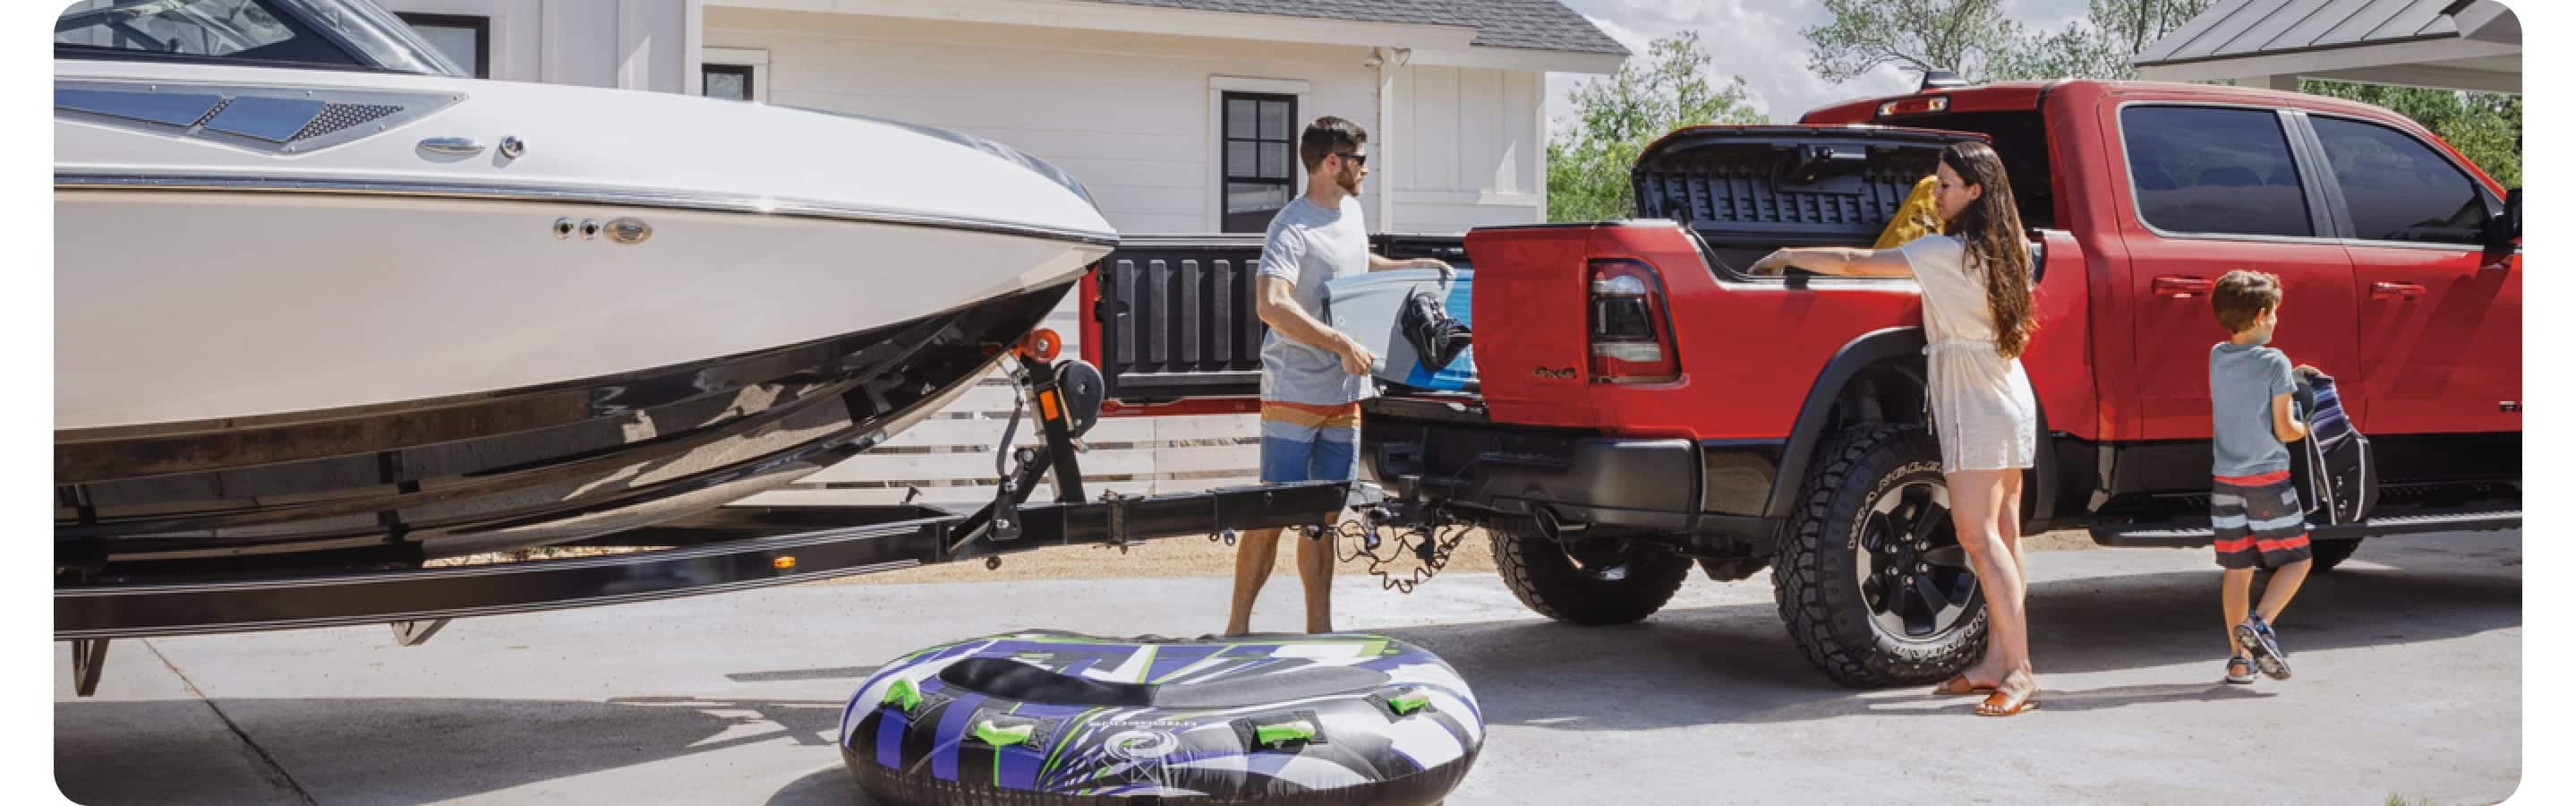 A family unloading a 2021 Ram 1500 with one door of its multifunction tailgate open, unimpeded by the boat the truck is towing.